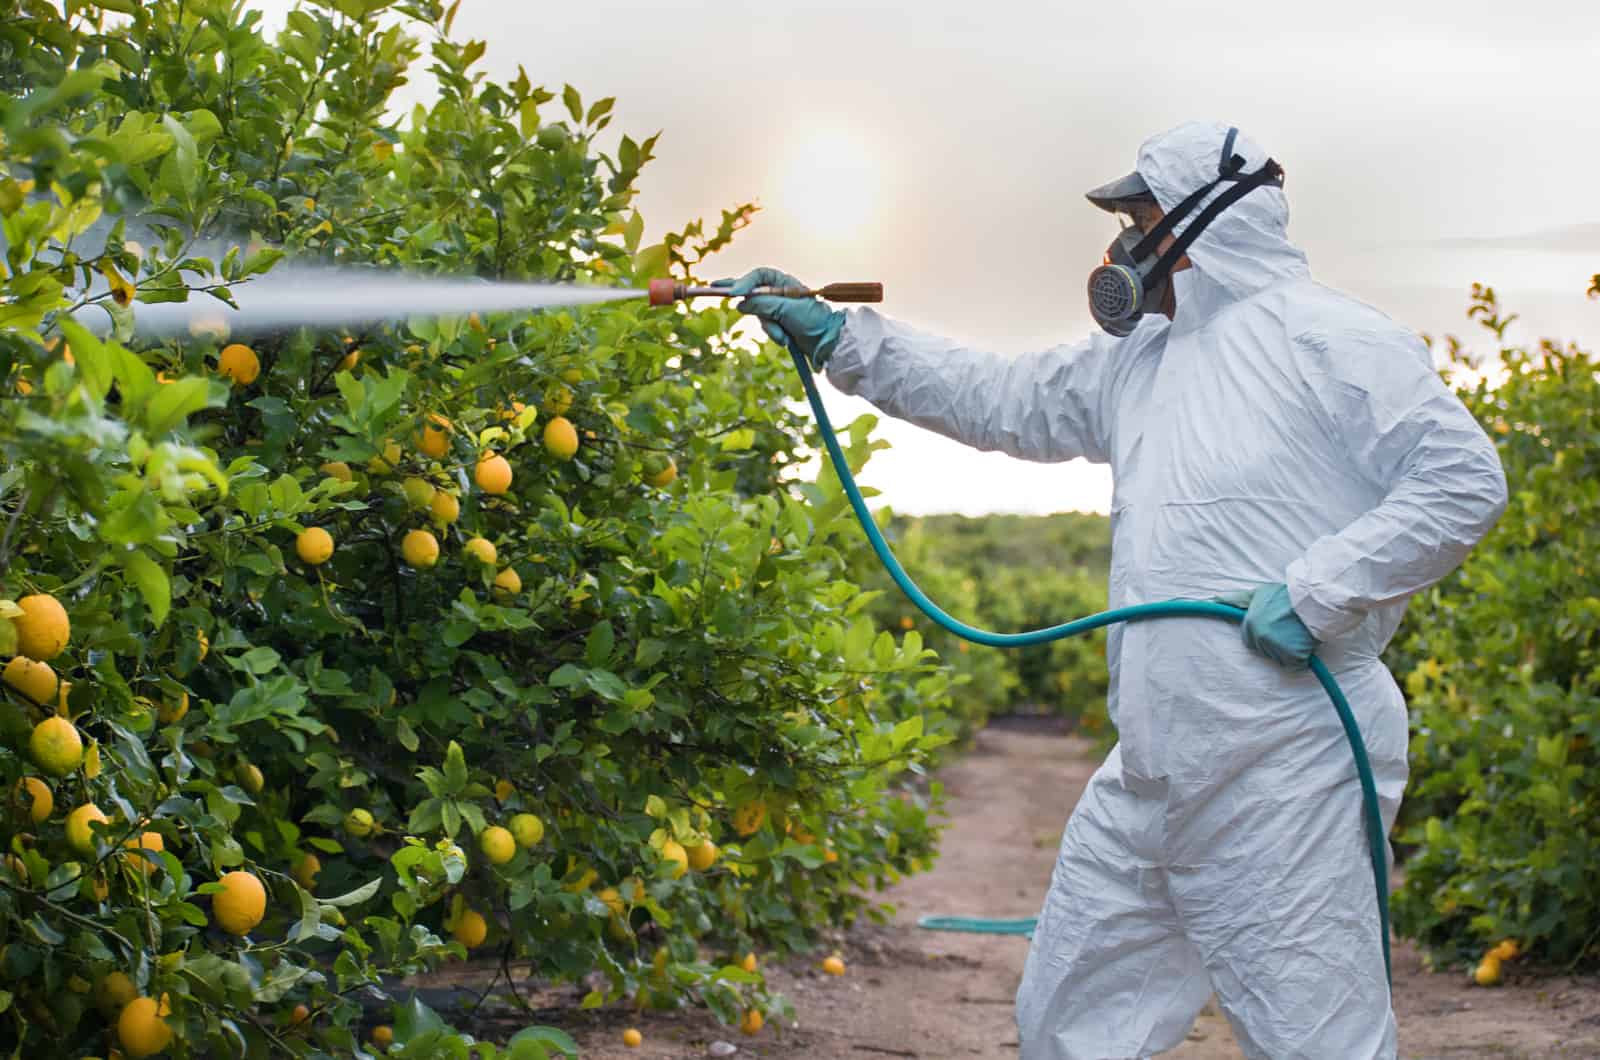 What Is The Best Lemon Tree Fertilizer? How And When To Apply It